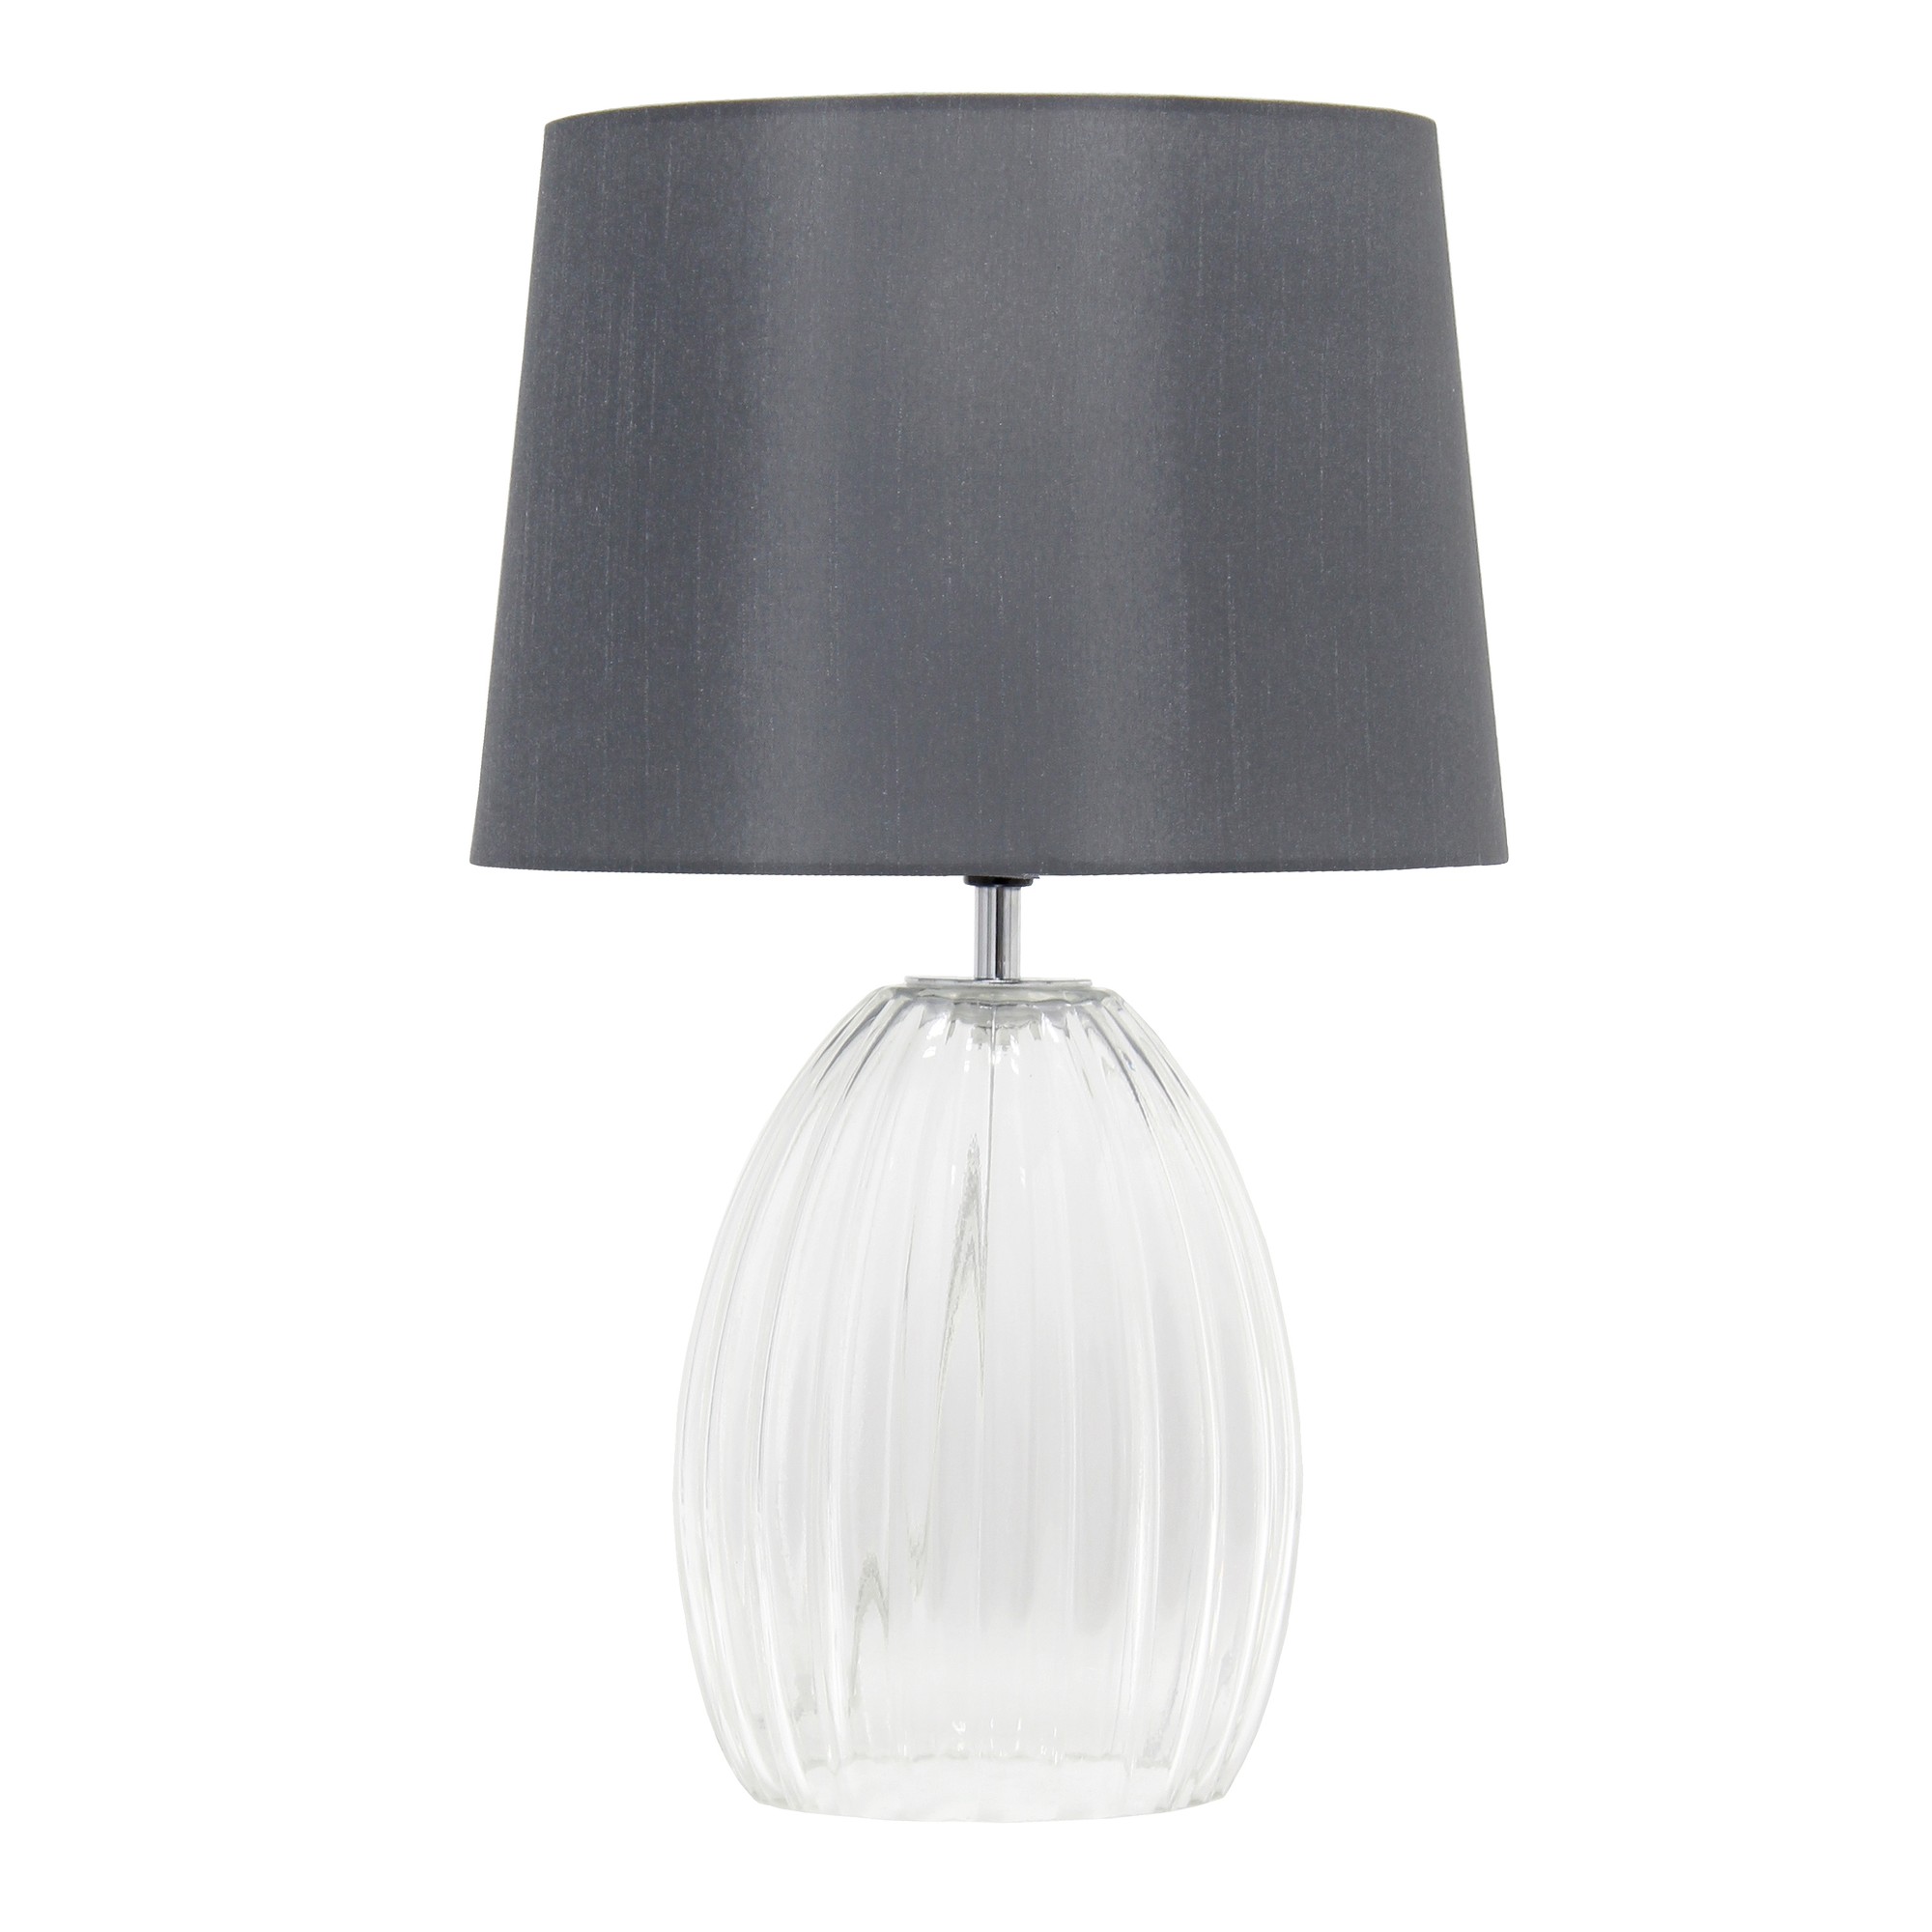 Lalia Home 17.63" Contemporary Fluted Glass Bedside Table Lamp with Gray Fabric Shade, Clear